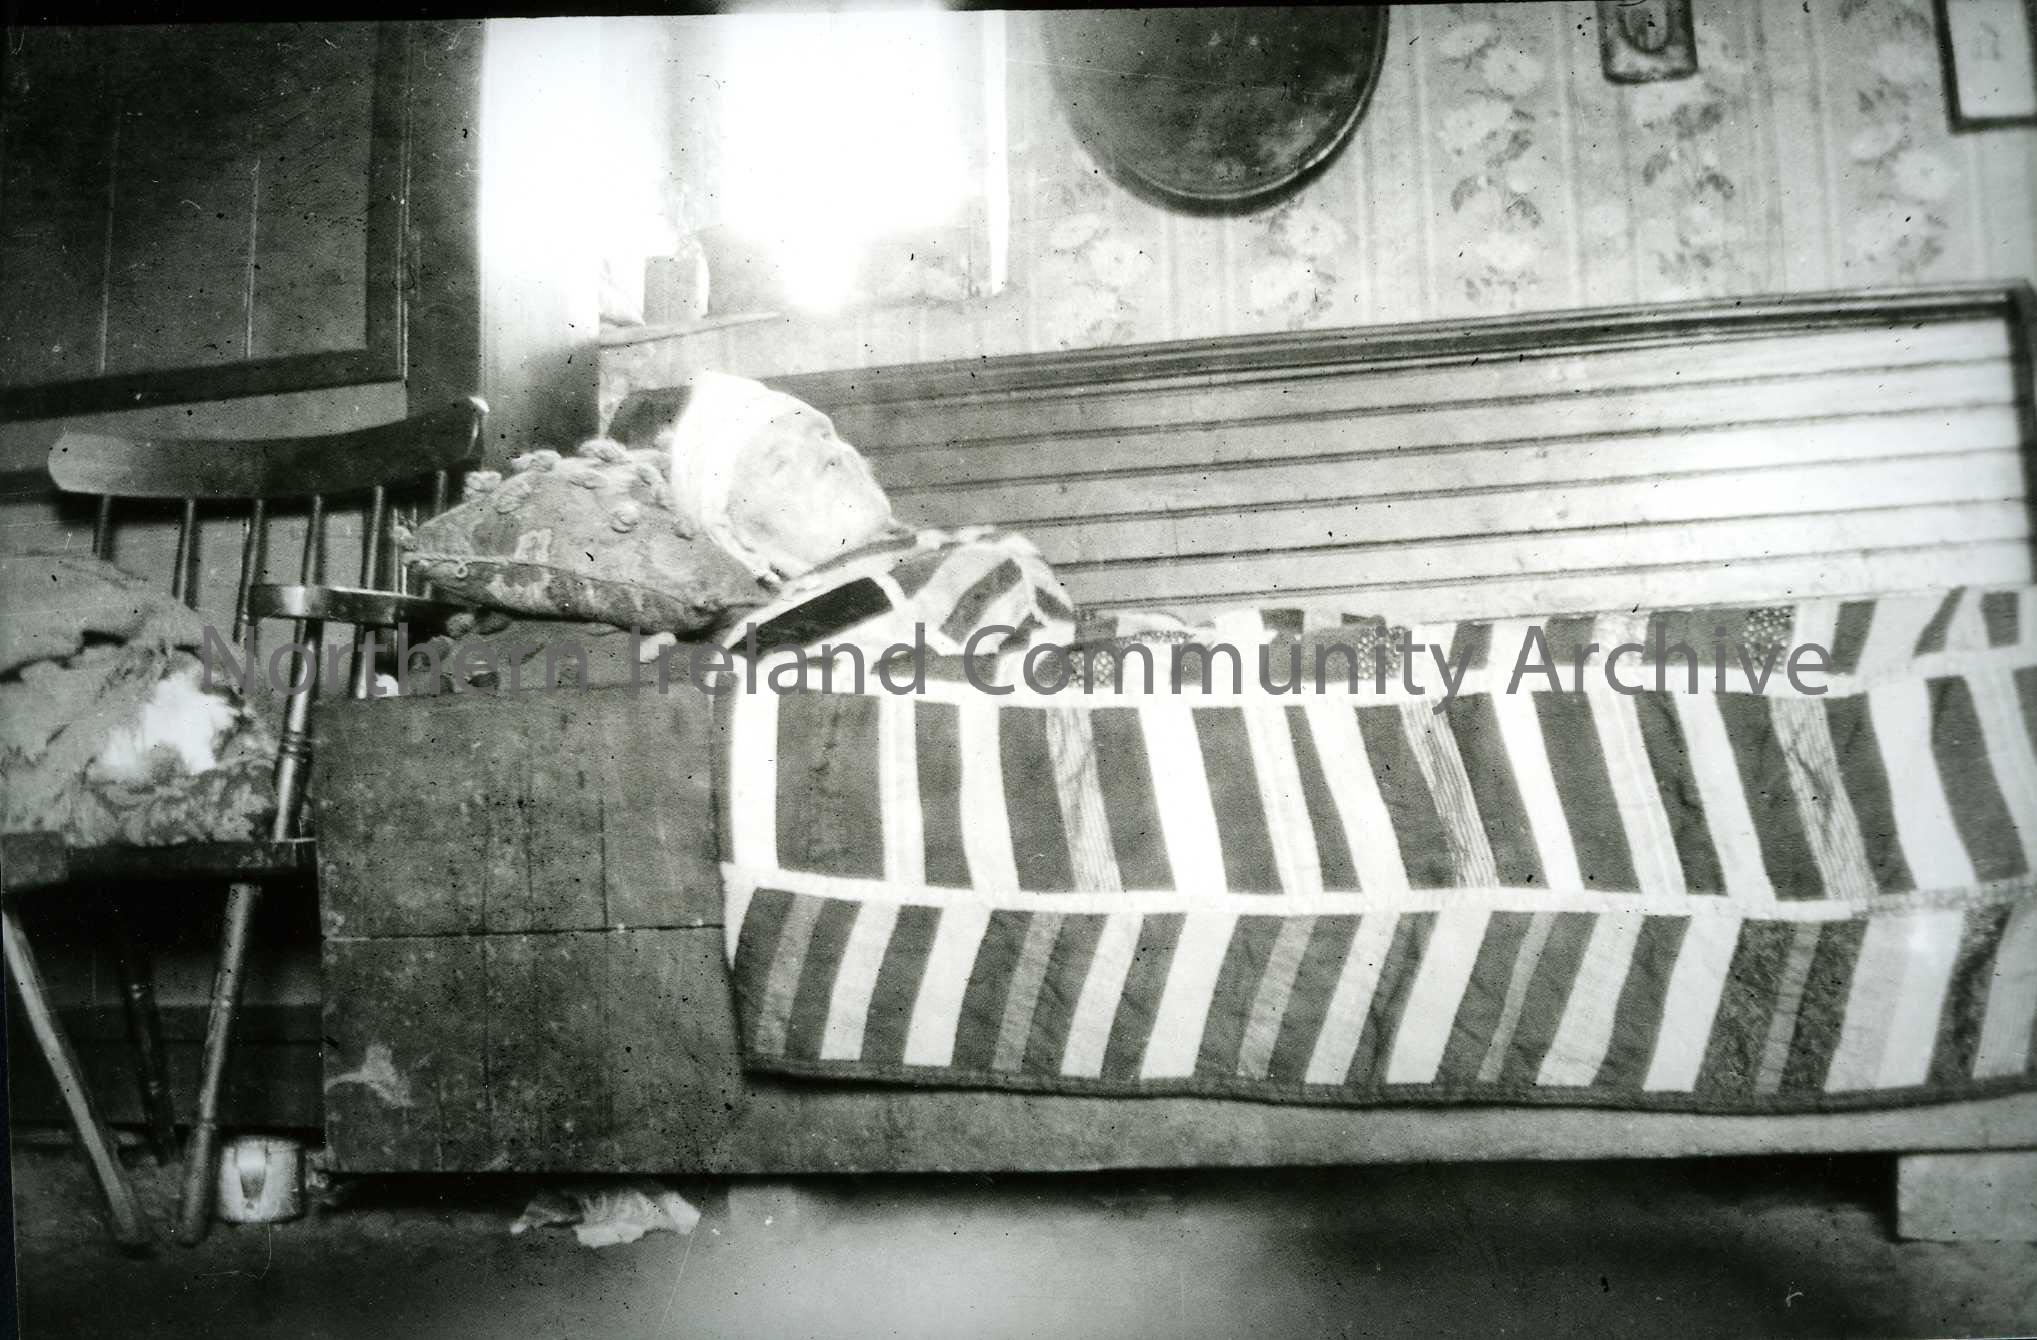 Printed black and white photograph – Elderly man lying on a bench inside a house, covered in a blanket and wearing a hat.